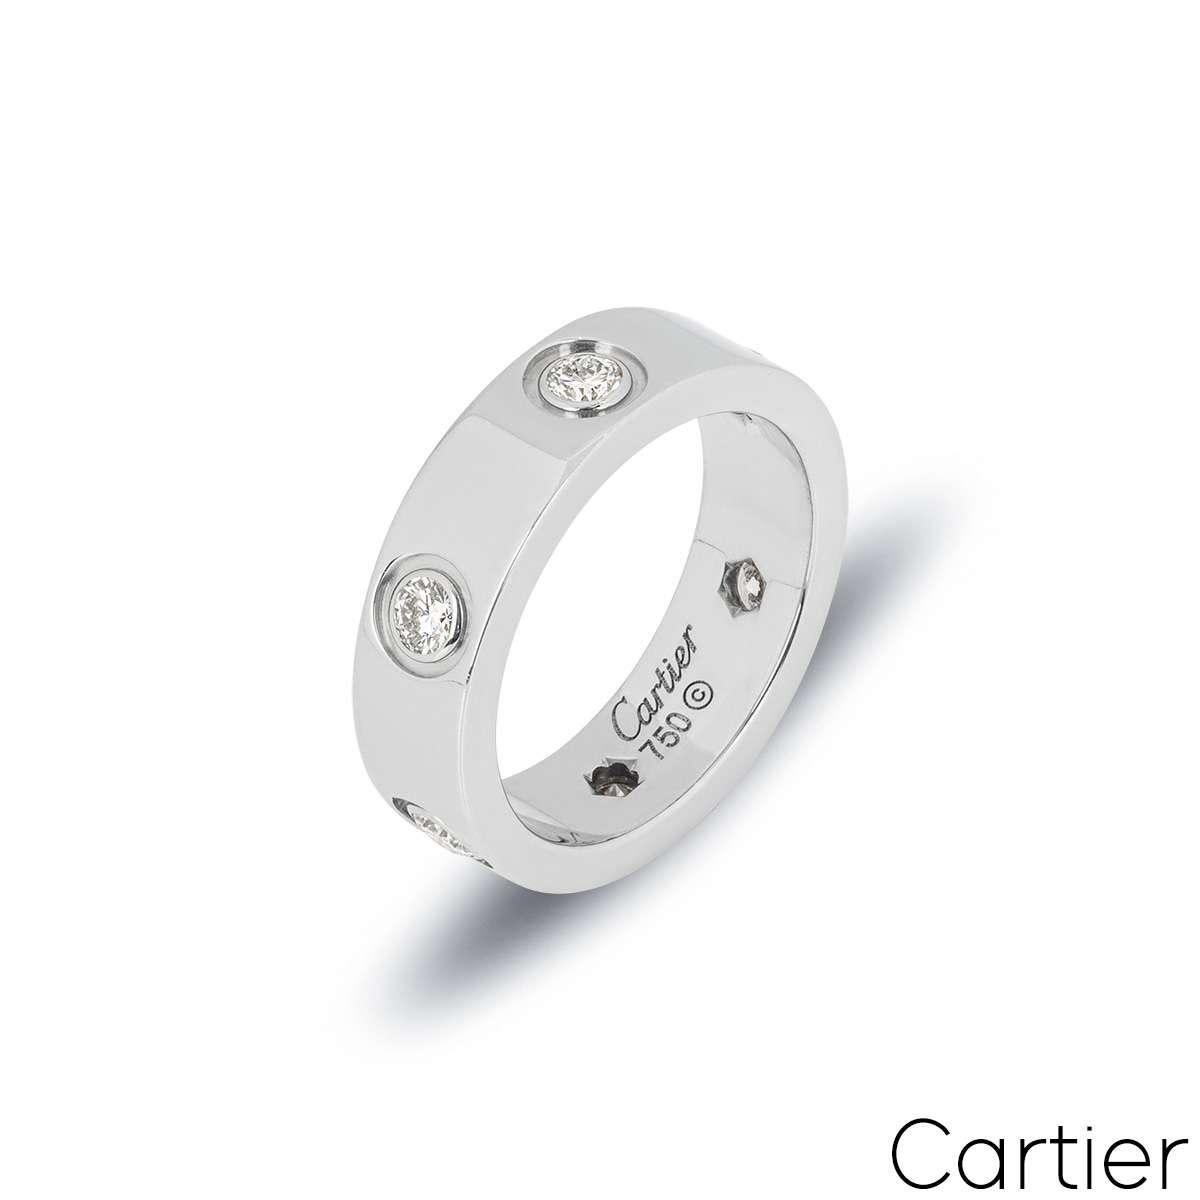 A Cartier diamond ring in white gold from the Love collection. The ring comprises of the iconic Cartier screws and six round brilliant cut diamonds. Measuring 5.5mm in width, the ring is a size UK L - EU 51 and has a gross weight of 7.9